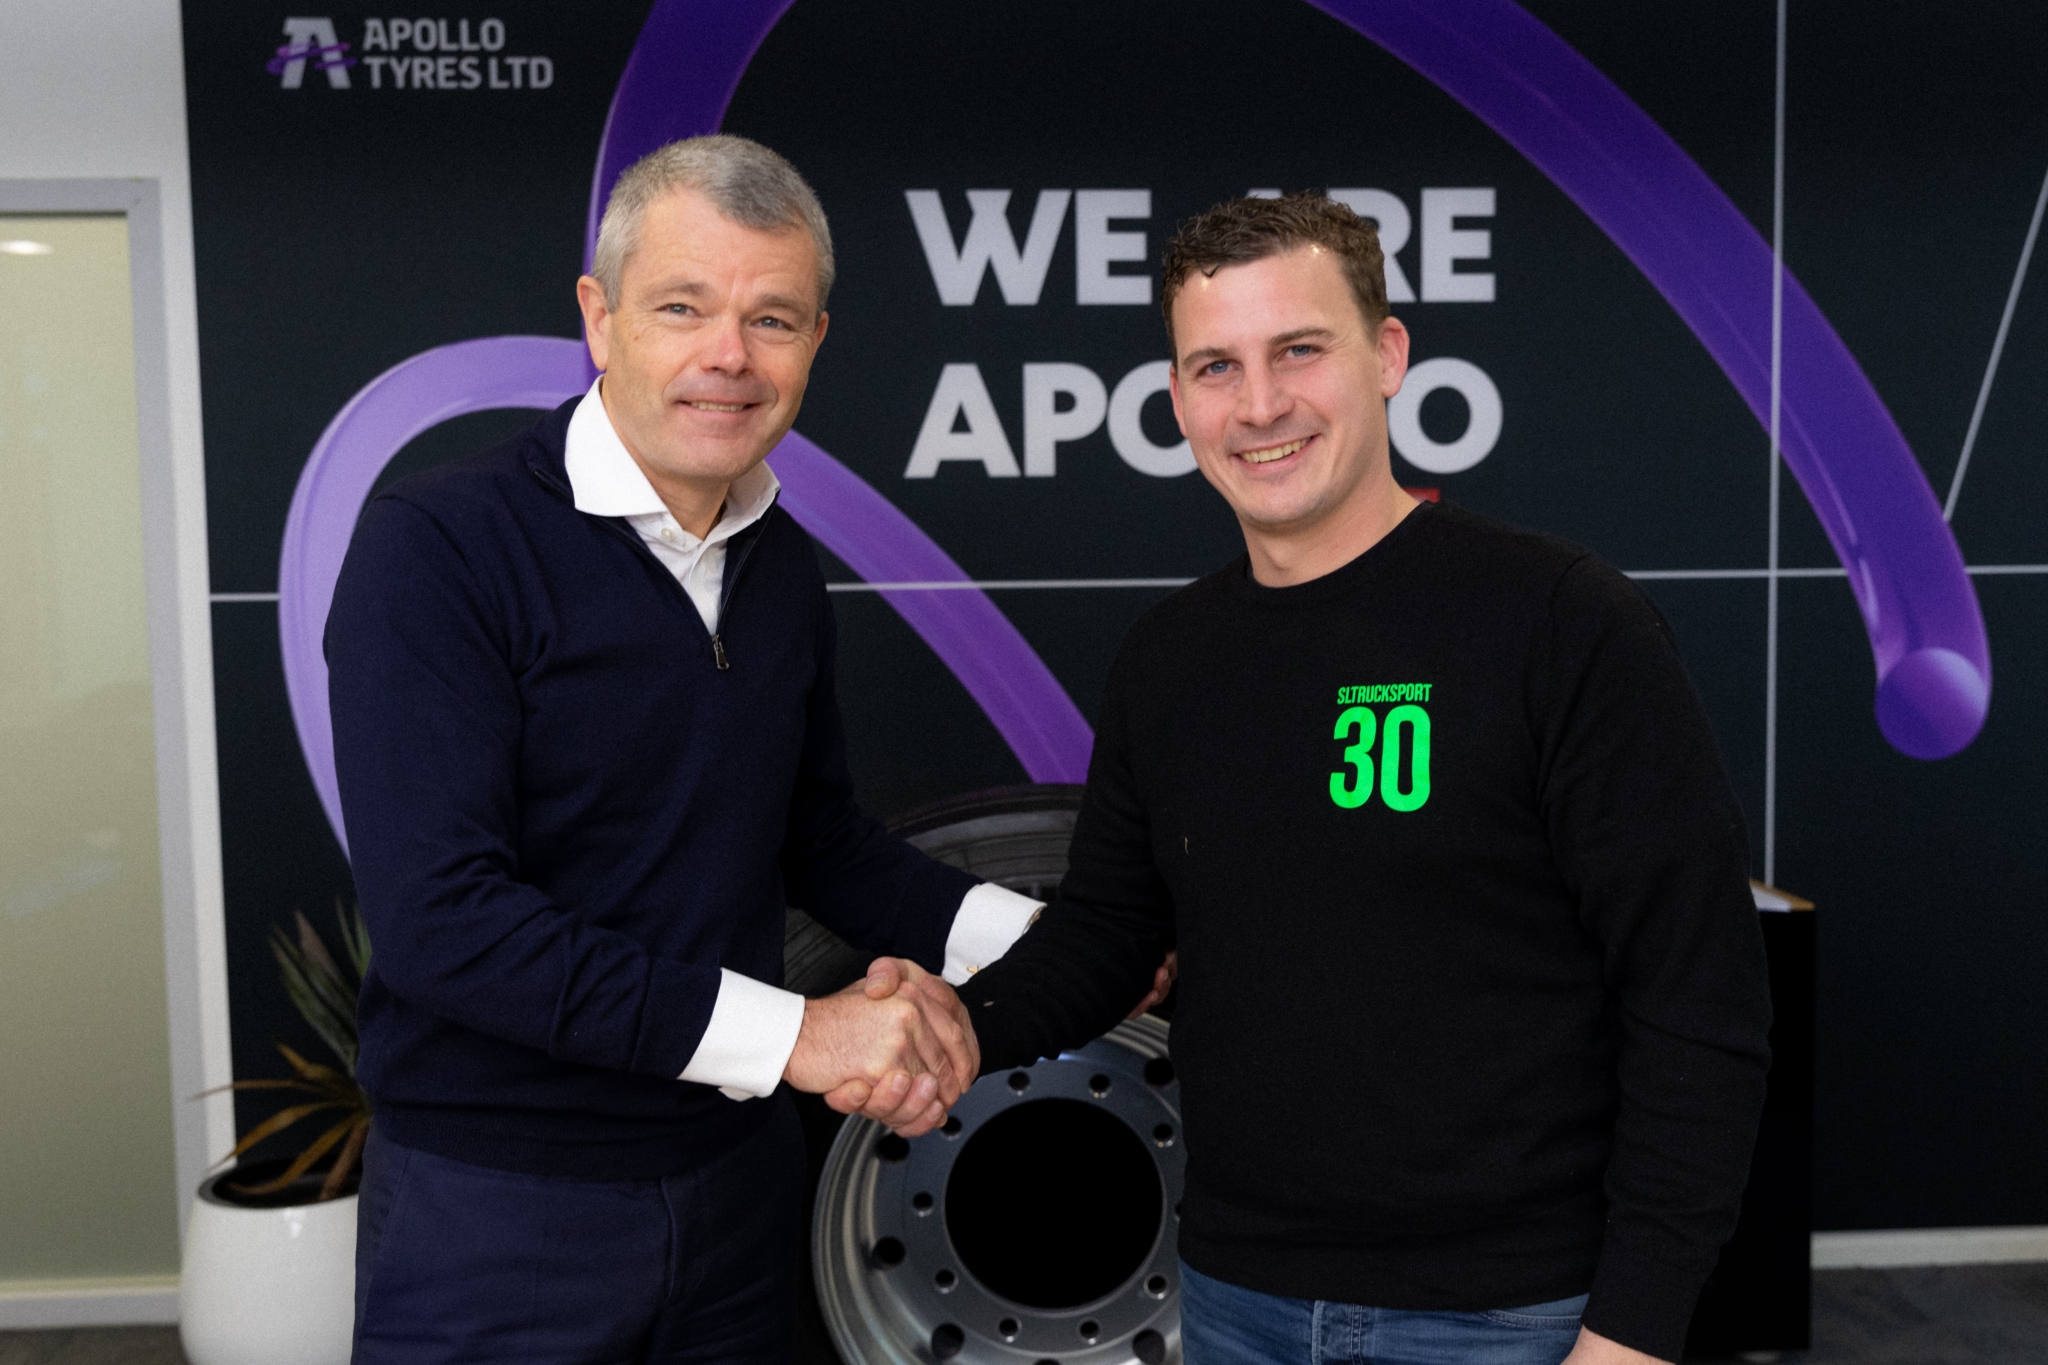 Apollo Tyres signs two-year truck racing sponsorship deal with Germany’s SL Trucksport 30